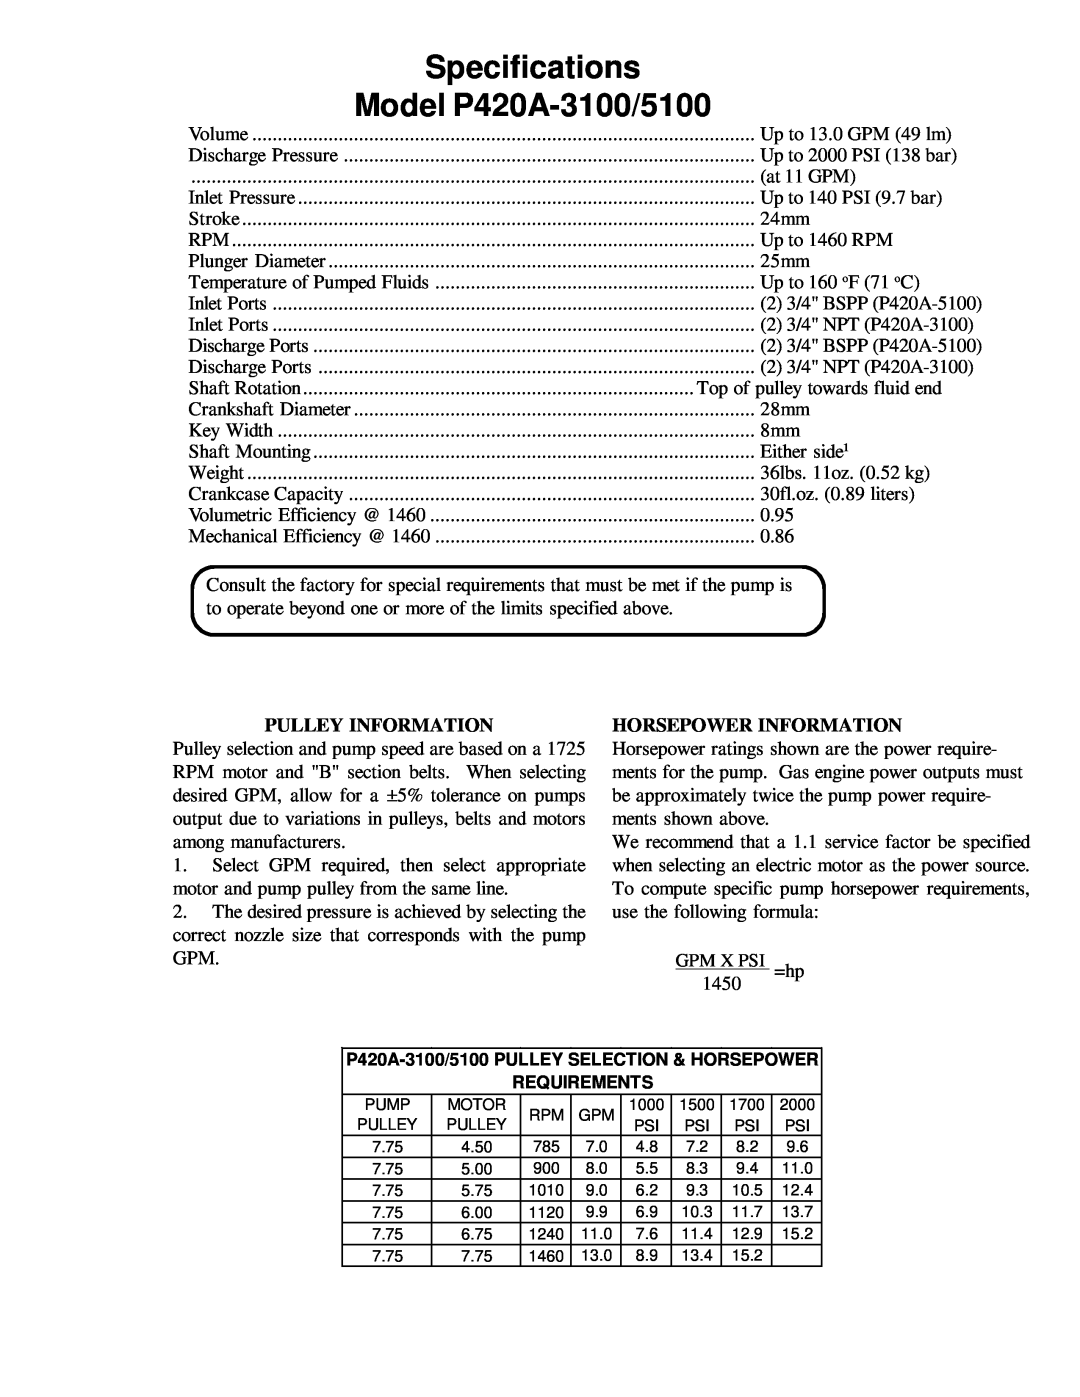 Giant operating instructions Specifications, Model P420A-3100/5100, Pulley Information, Horsepower Information 